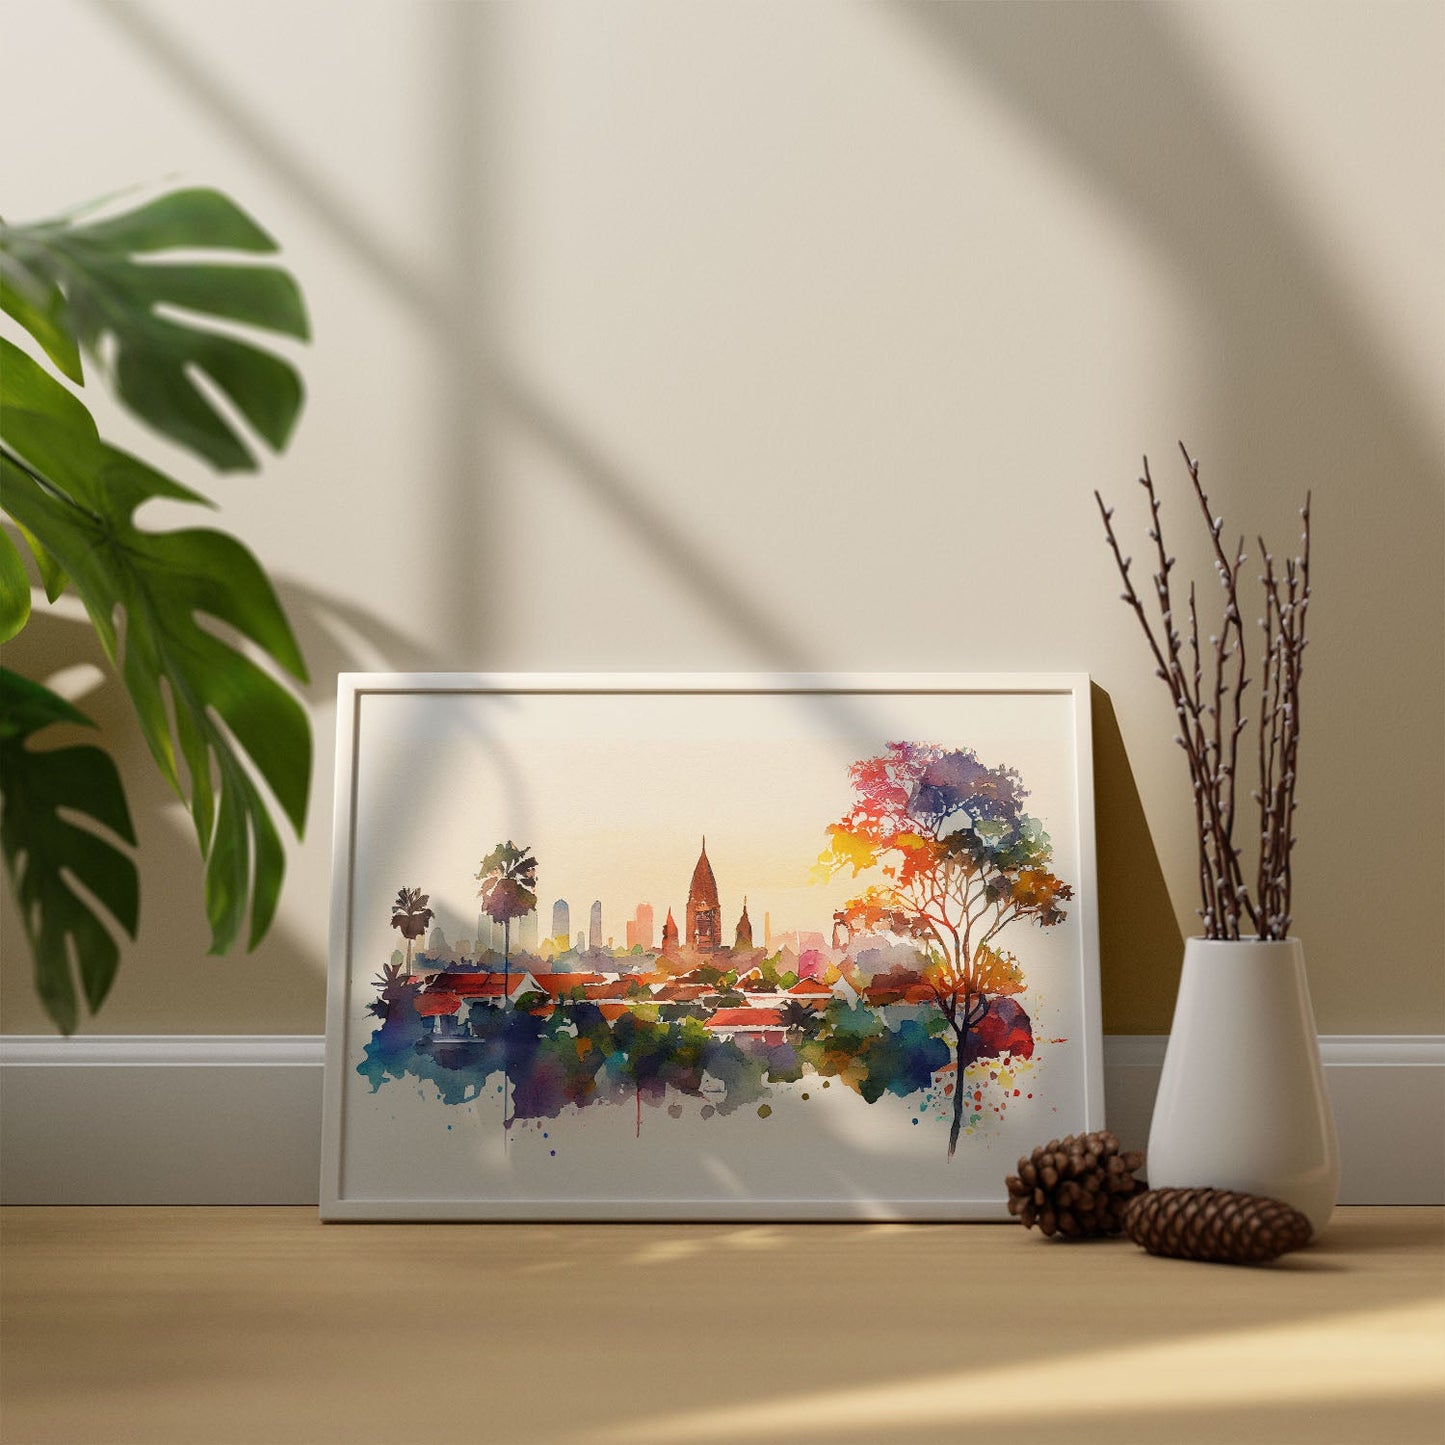 Nacnic watercolor of a skyline of the city of Bali_1. Aesthetic Wall Art Prints for Bedroom or Living Room Design.-Artwork-Nacnic-A4-Sin Marco-Nacnic Estudio SL